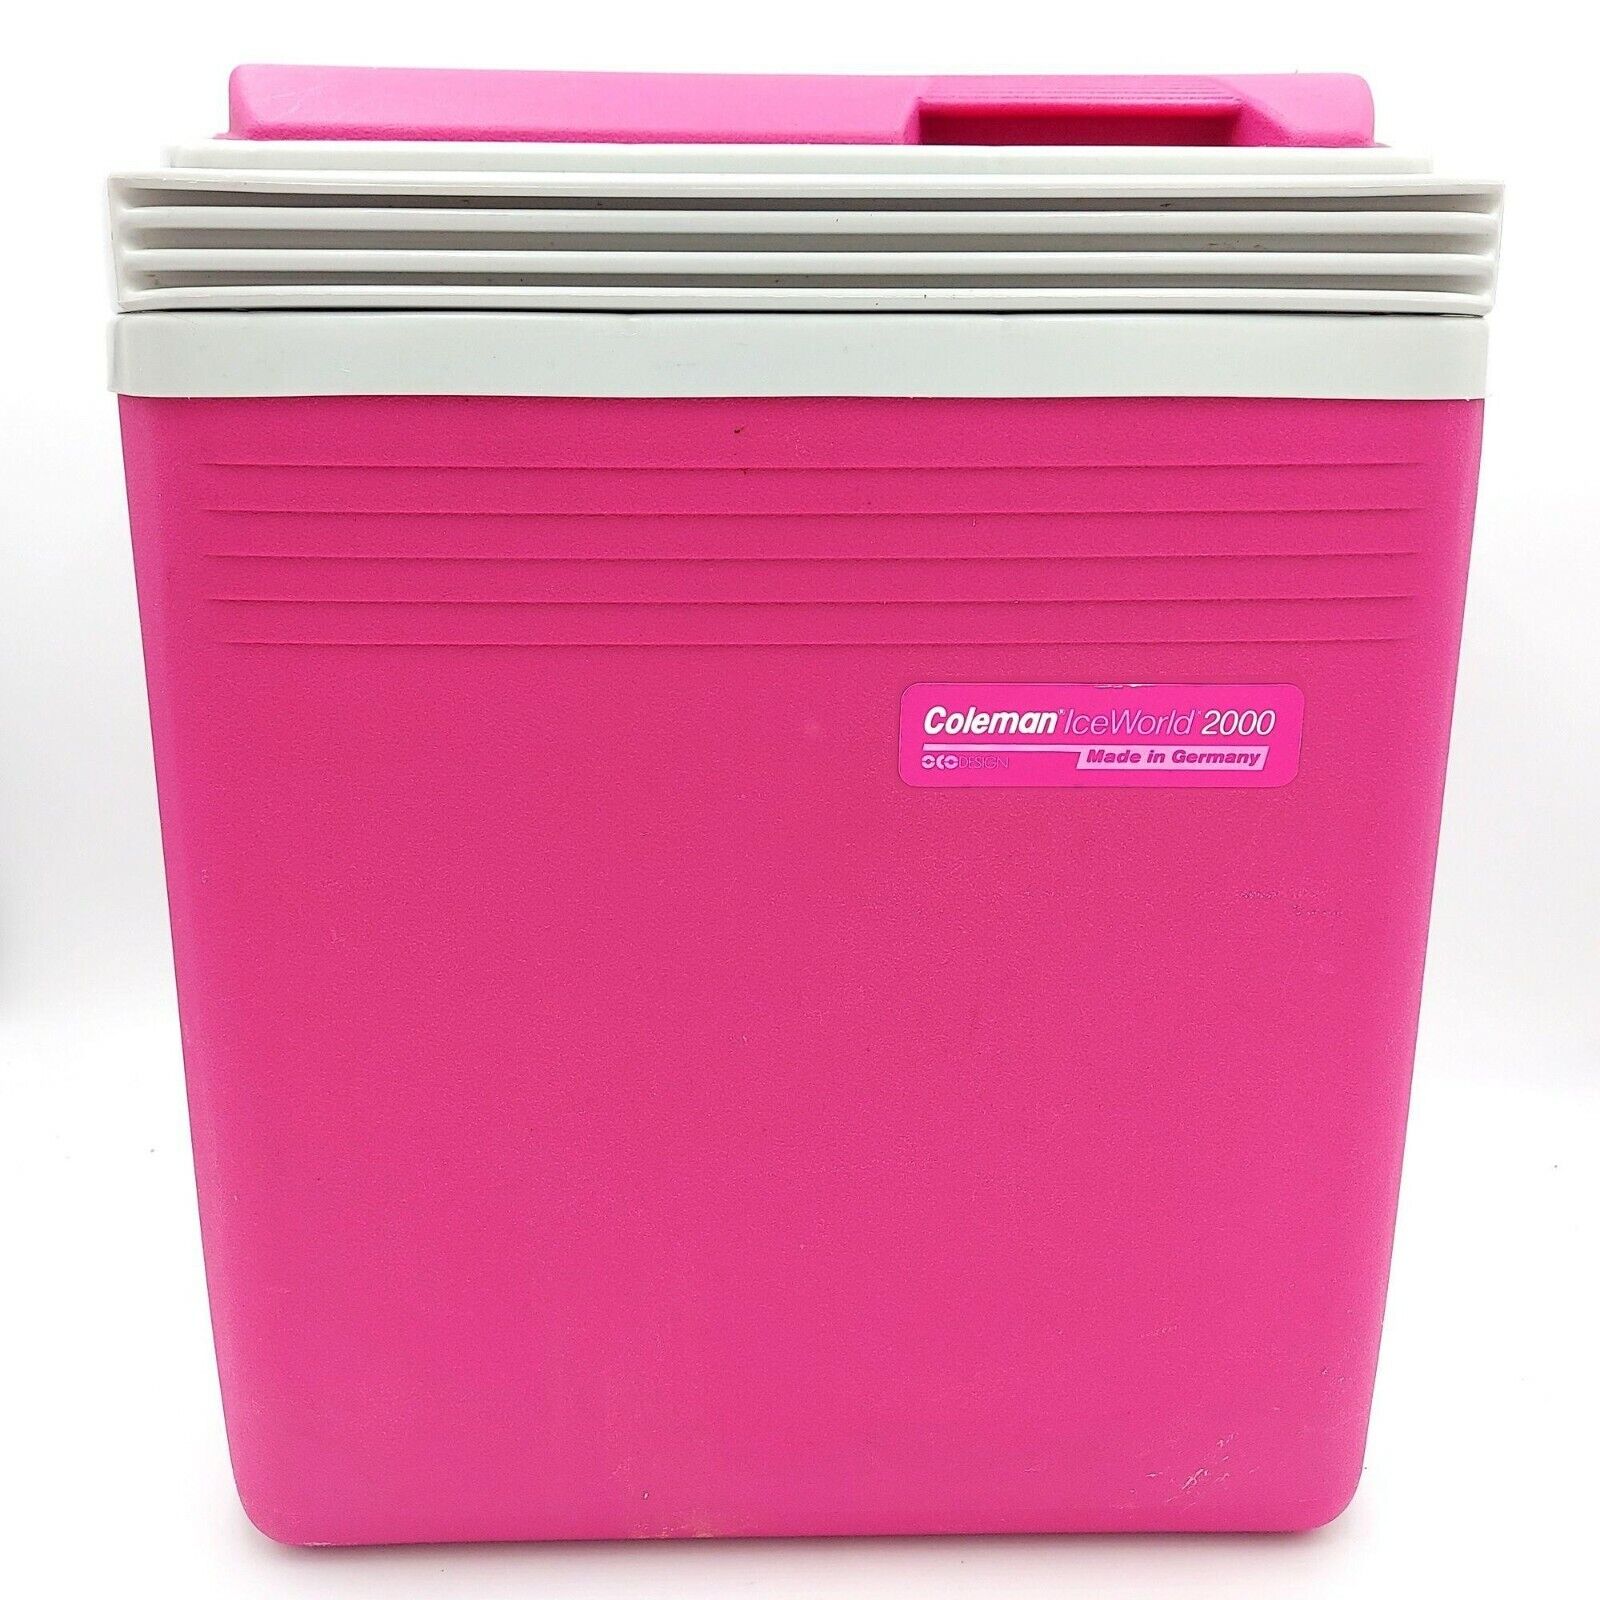 Coleman Ice World 2000 Cooler Vintage Pink Fuchsia 1989 Made in Germany Kuhlbox 